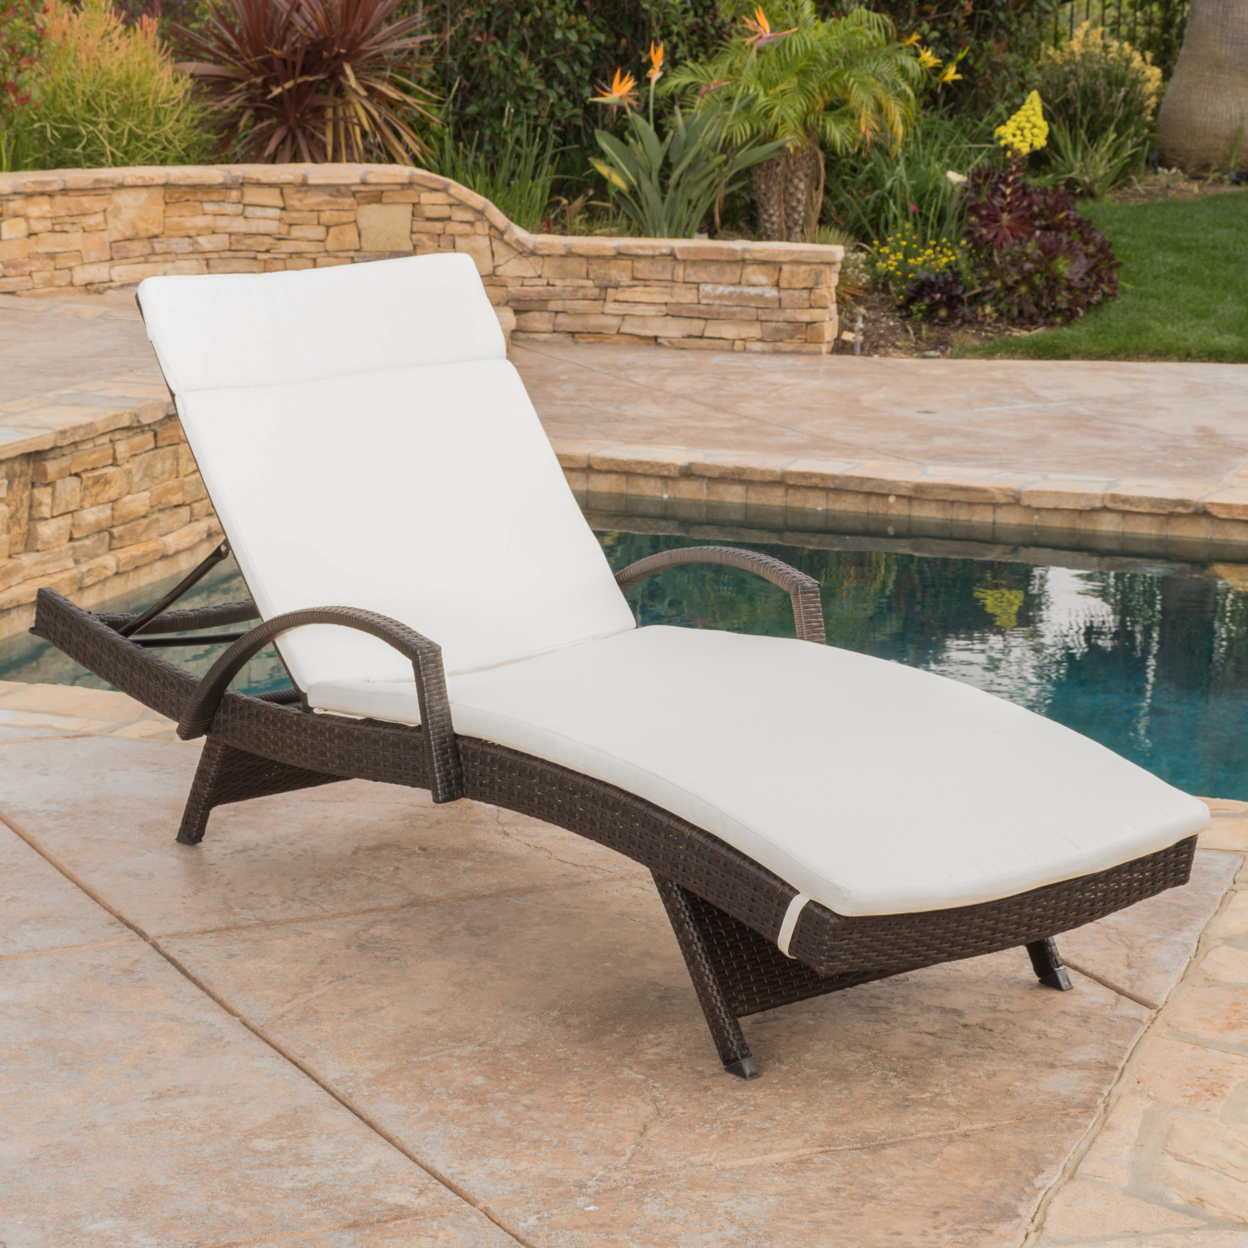 Lakeport Outdoor Adjustable Armed Chaise Lounge Chair With Cushion - Beige